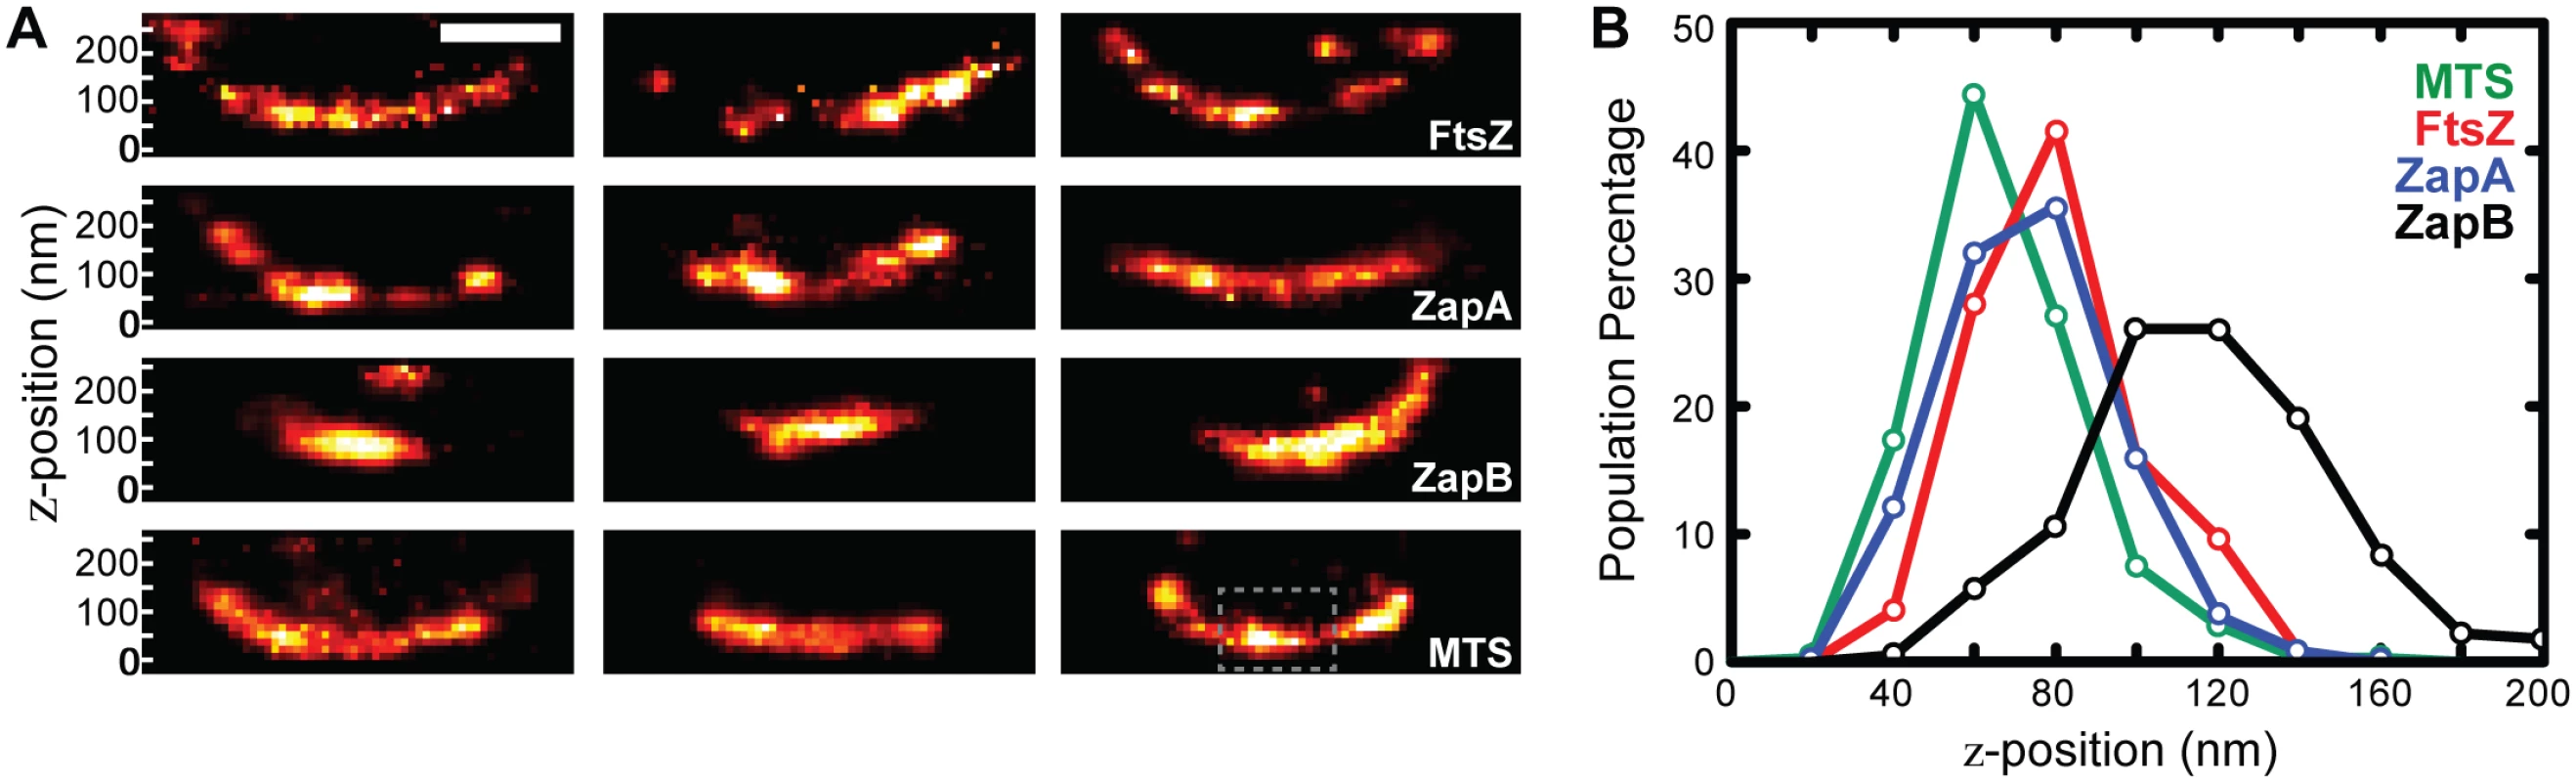 iPALM imaging and <i>z</i>-position measurements of FtsZ, ZapA, and ZapB.